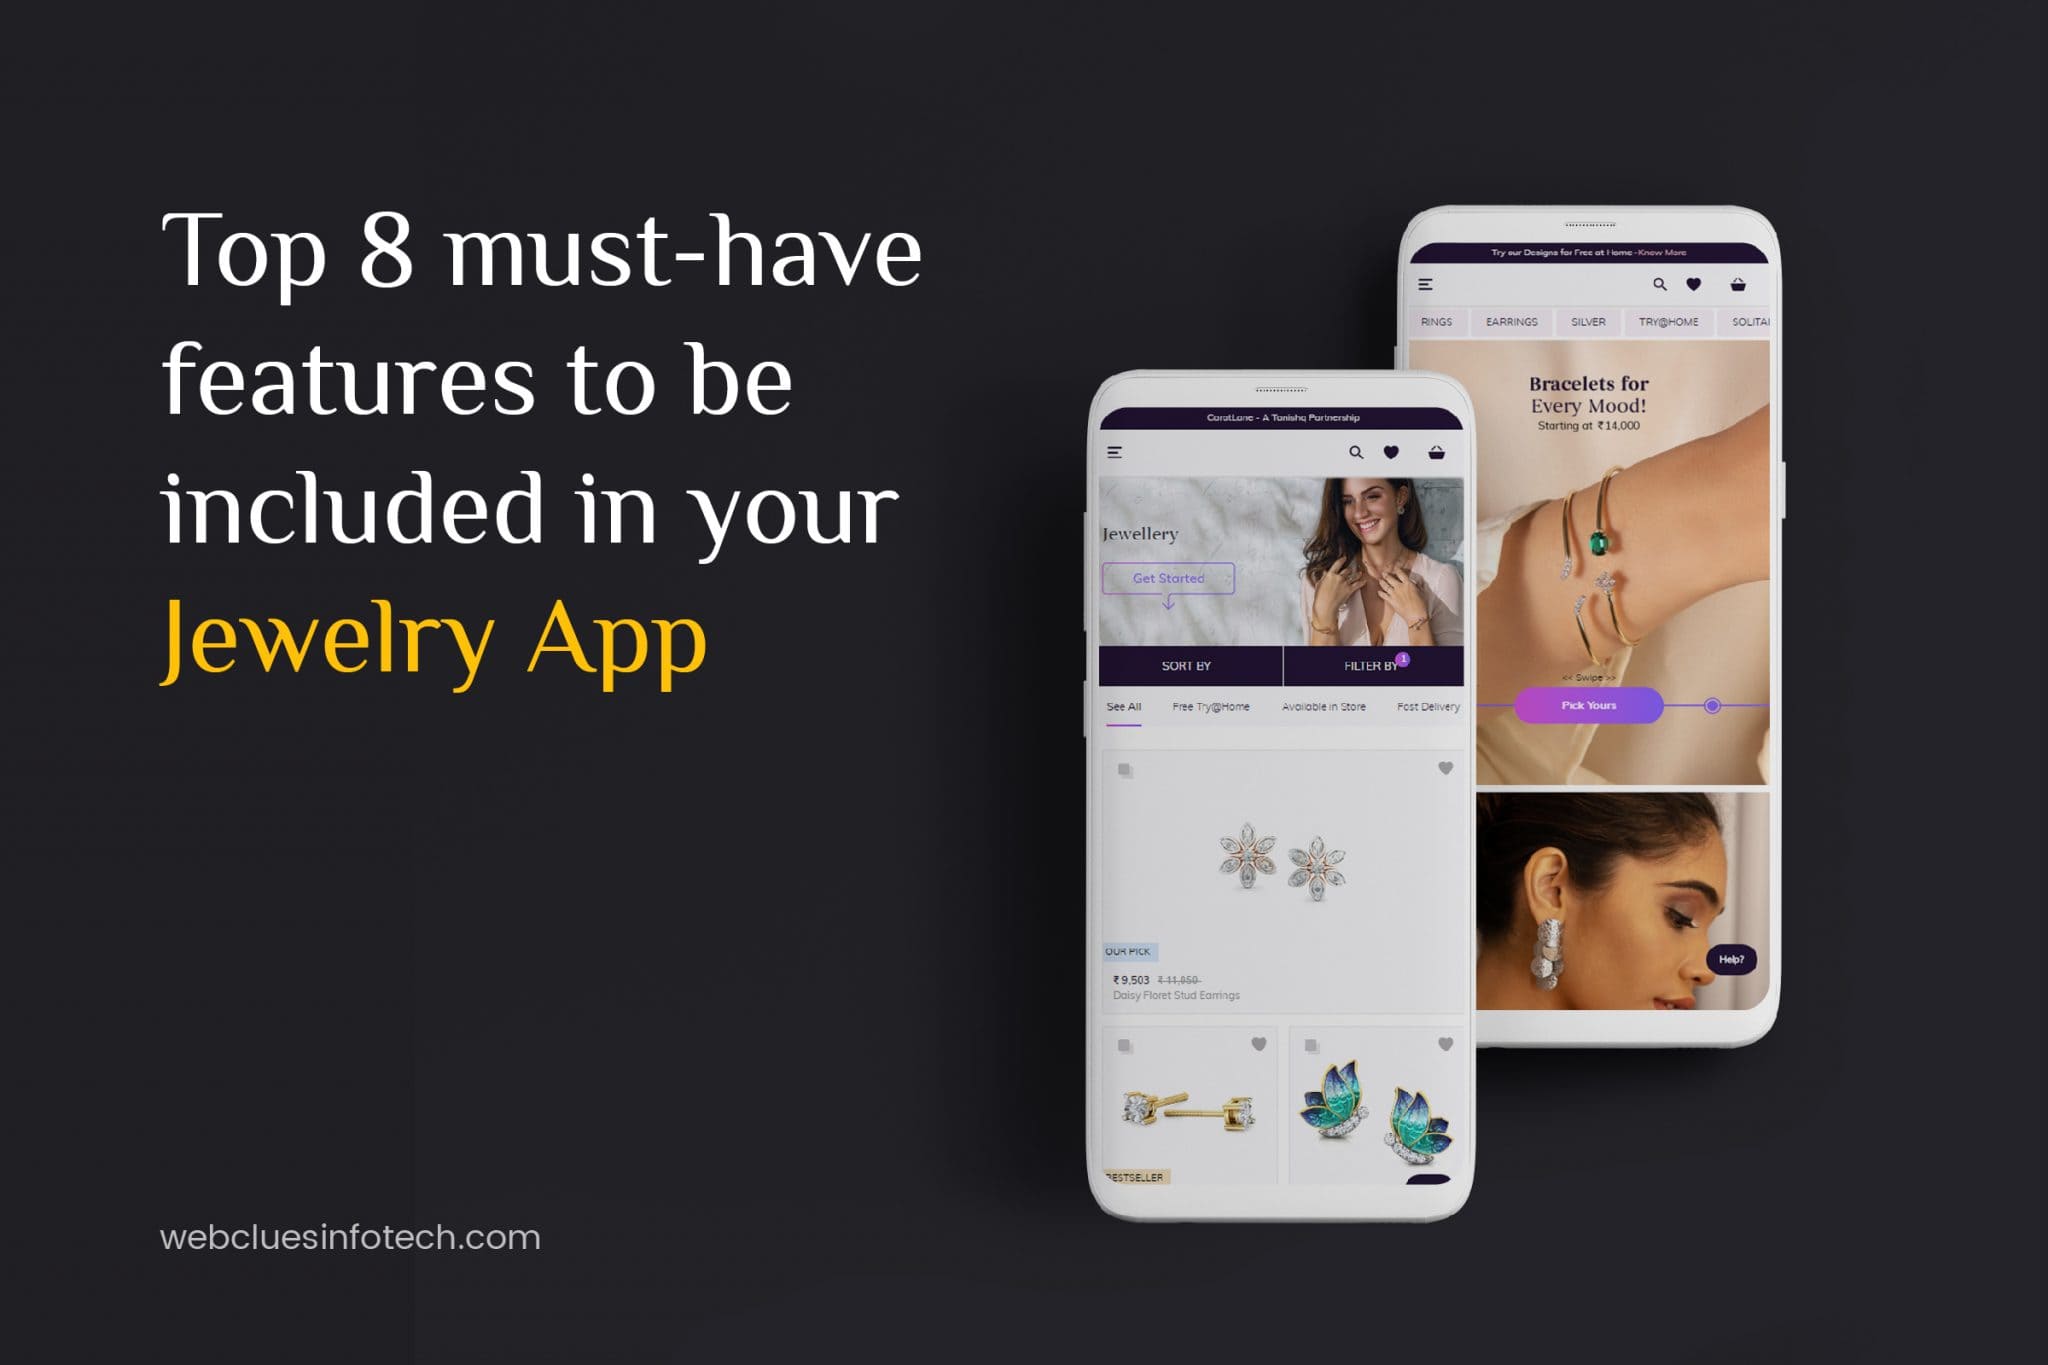 Top 8 Must-Have Features to be Included in Your Jewelry App